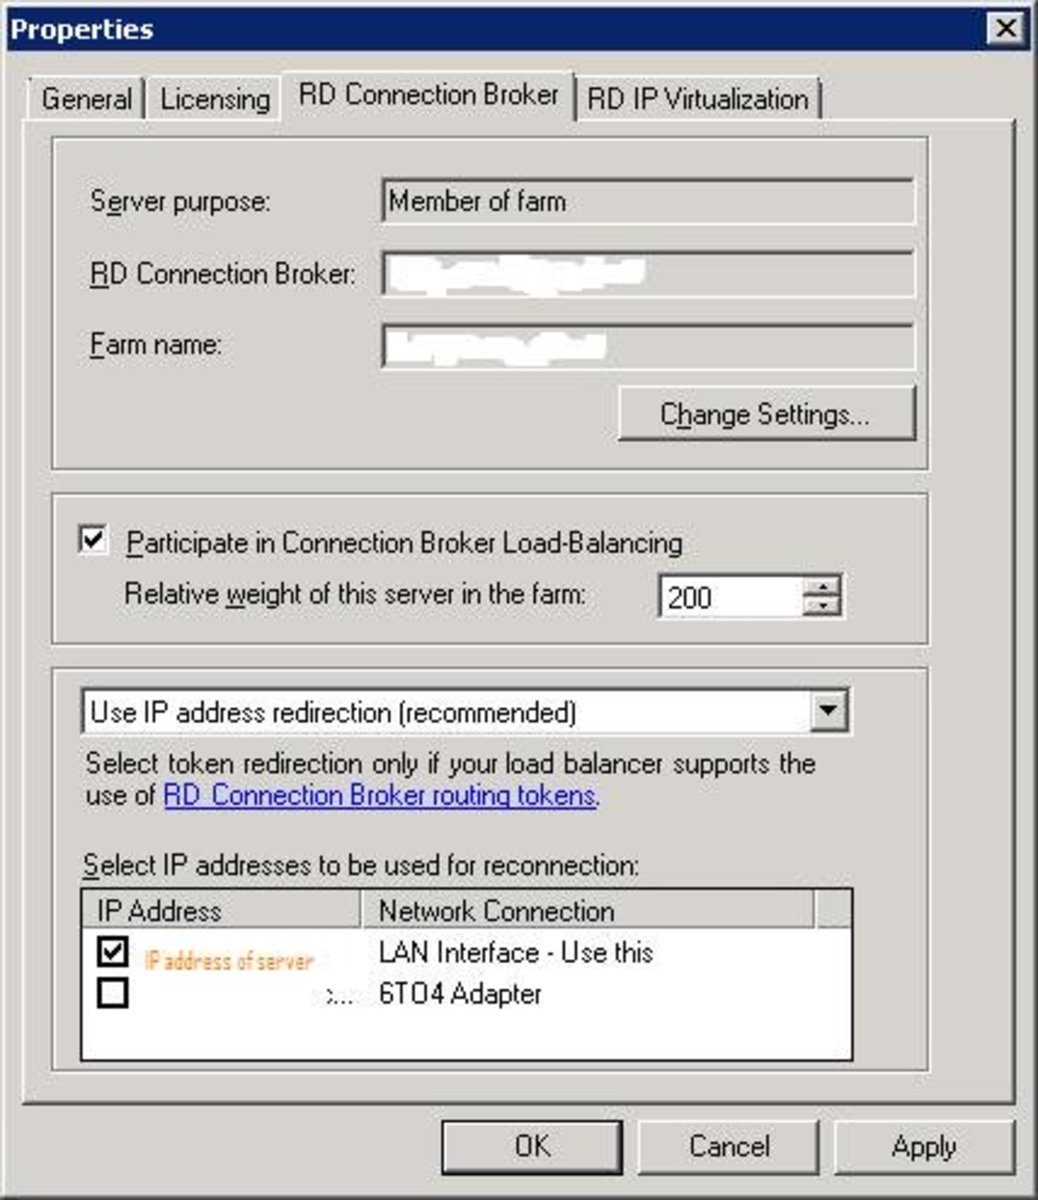 RD Connection Broker settings.